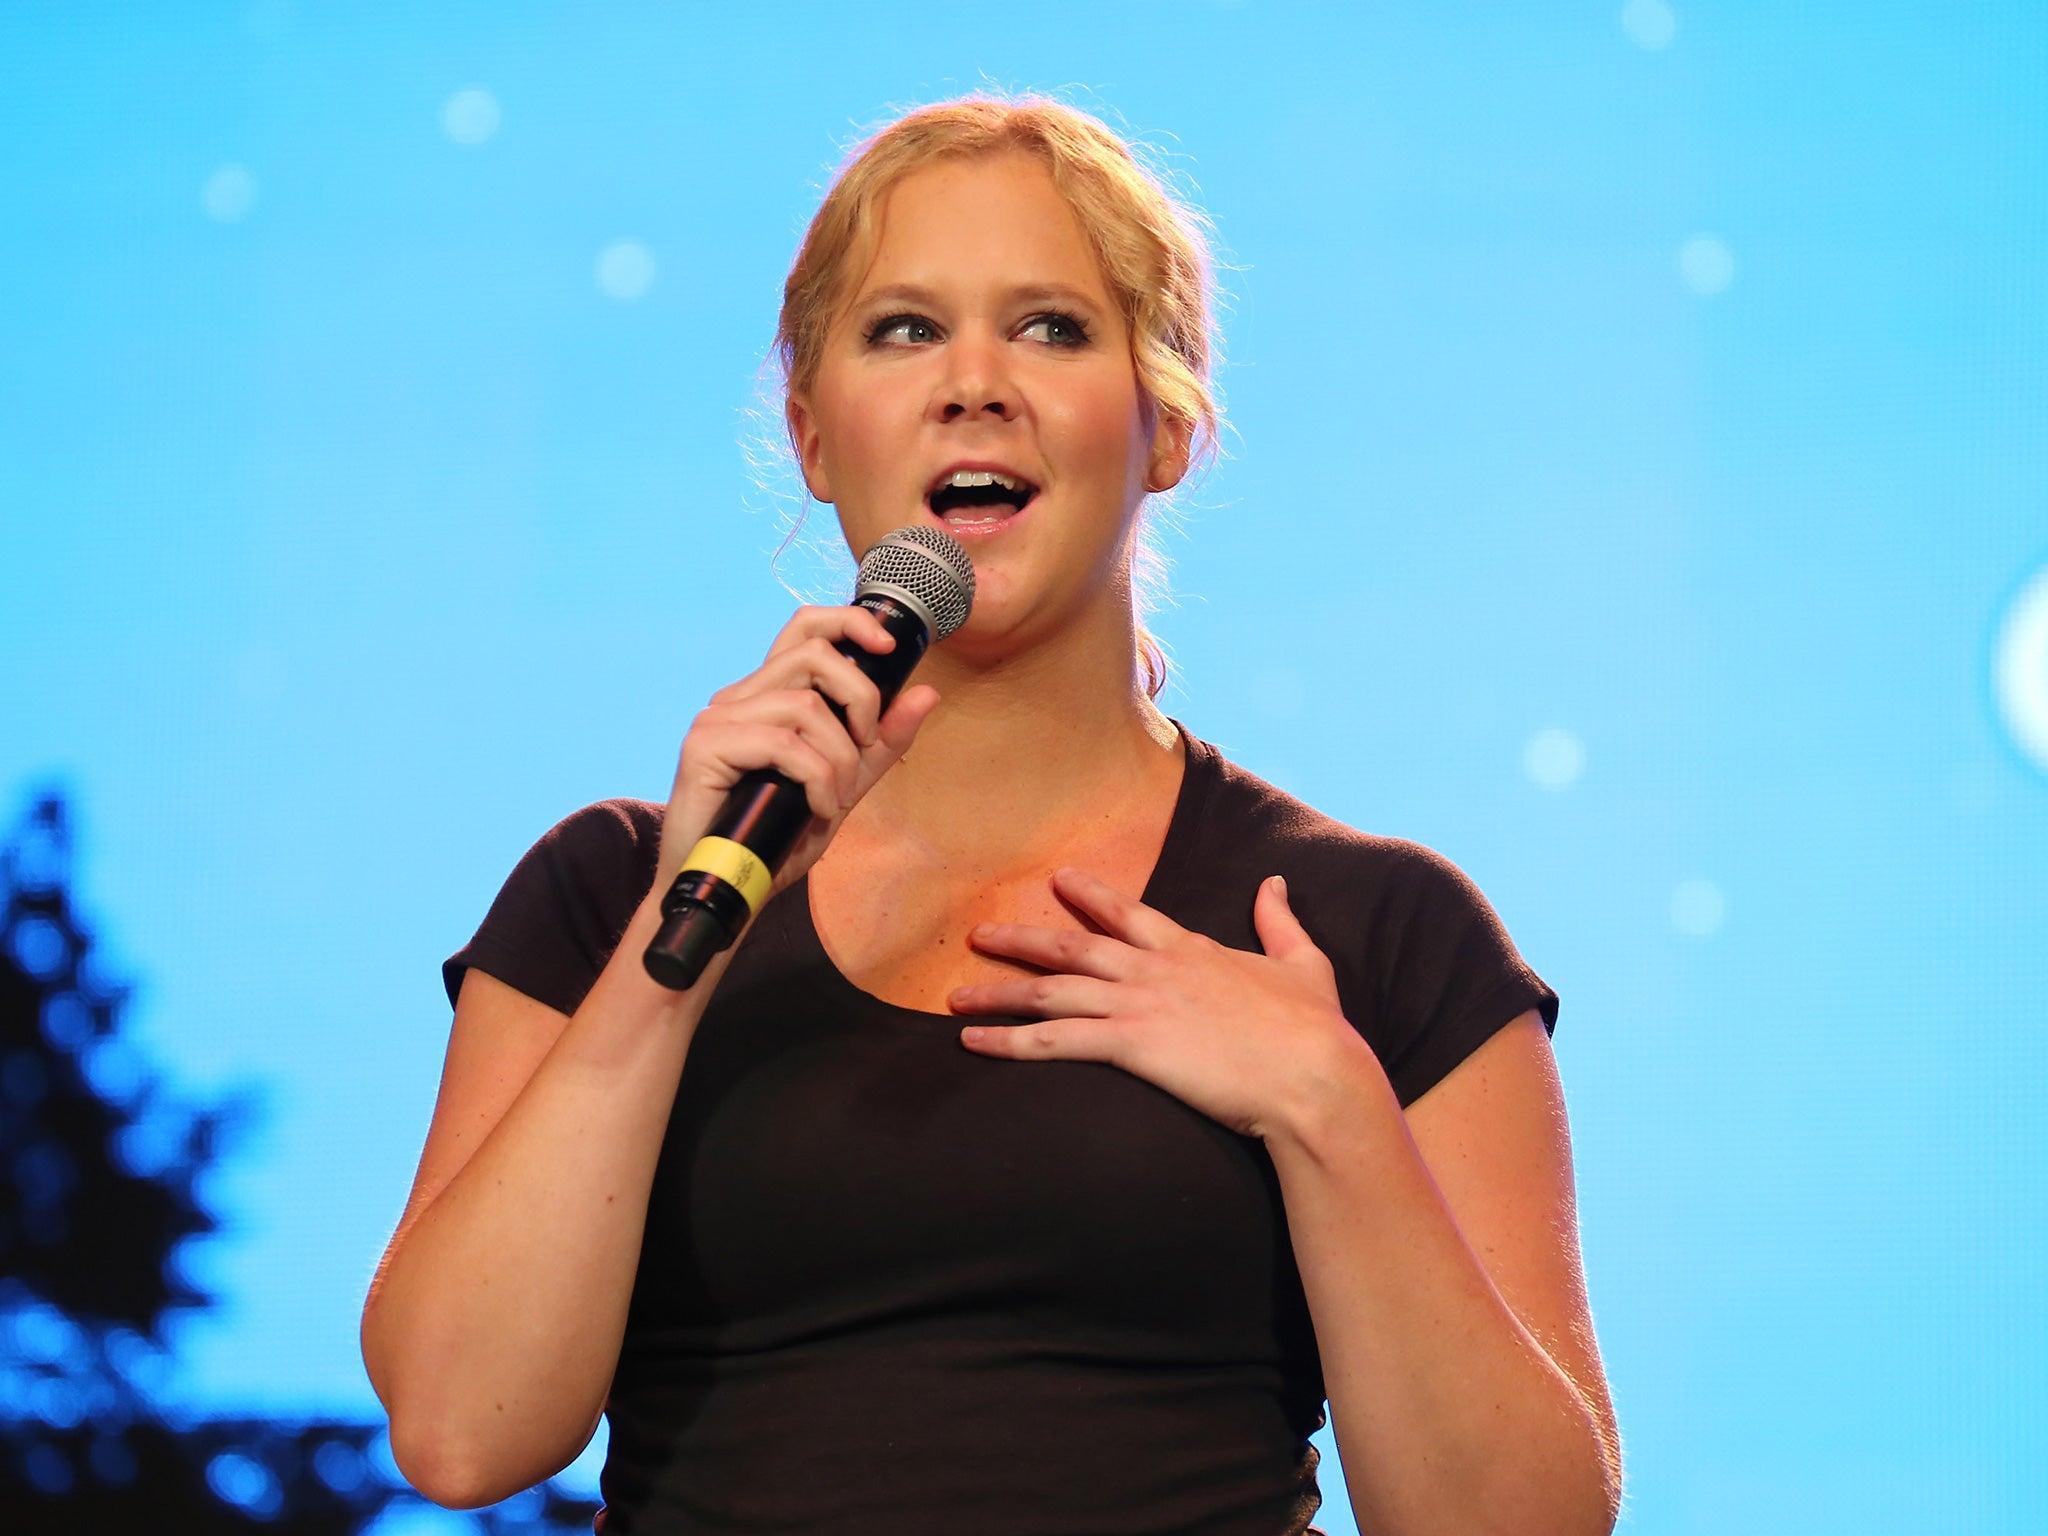 Amy Schumer has denied accusations of joke-stealing on her show 'Inside Amy Schumer'